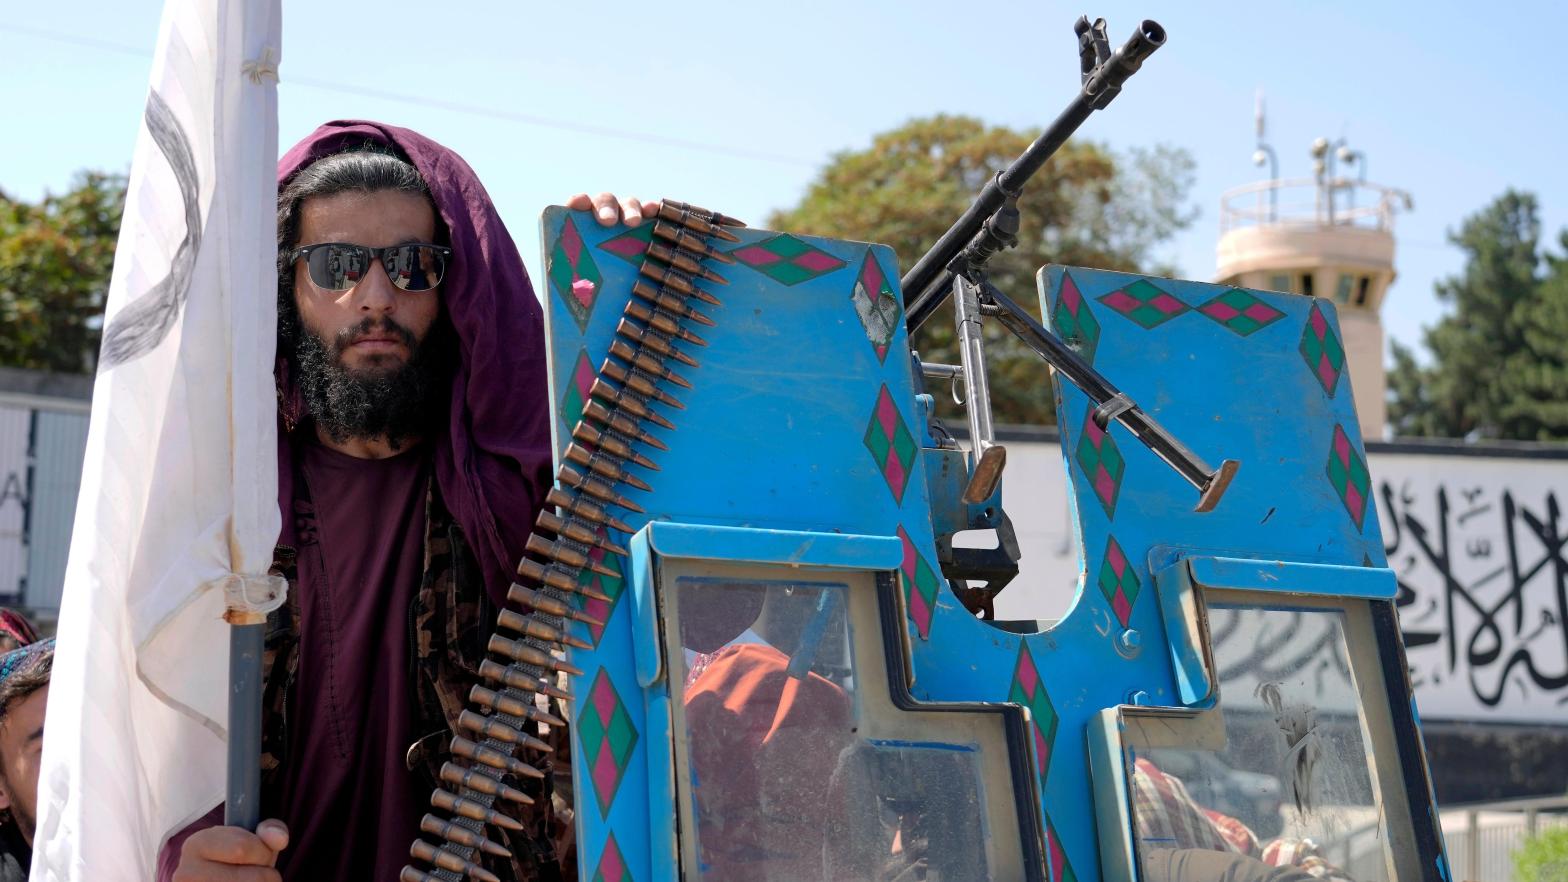 A Taliban fighter poses in front of the U.S. Embassy in Kabul during a celebration marking the first anniversary of the withdrawal of US-led troops from Afghanistan. (Photo: Ebrahim Noroozi, AP)